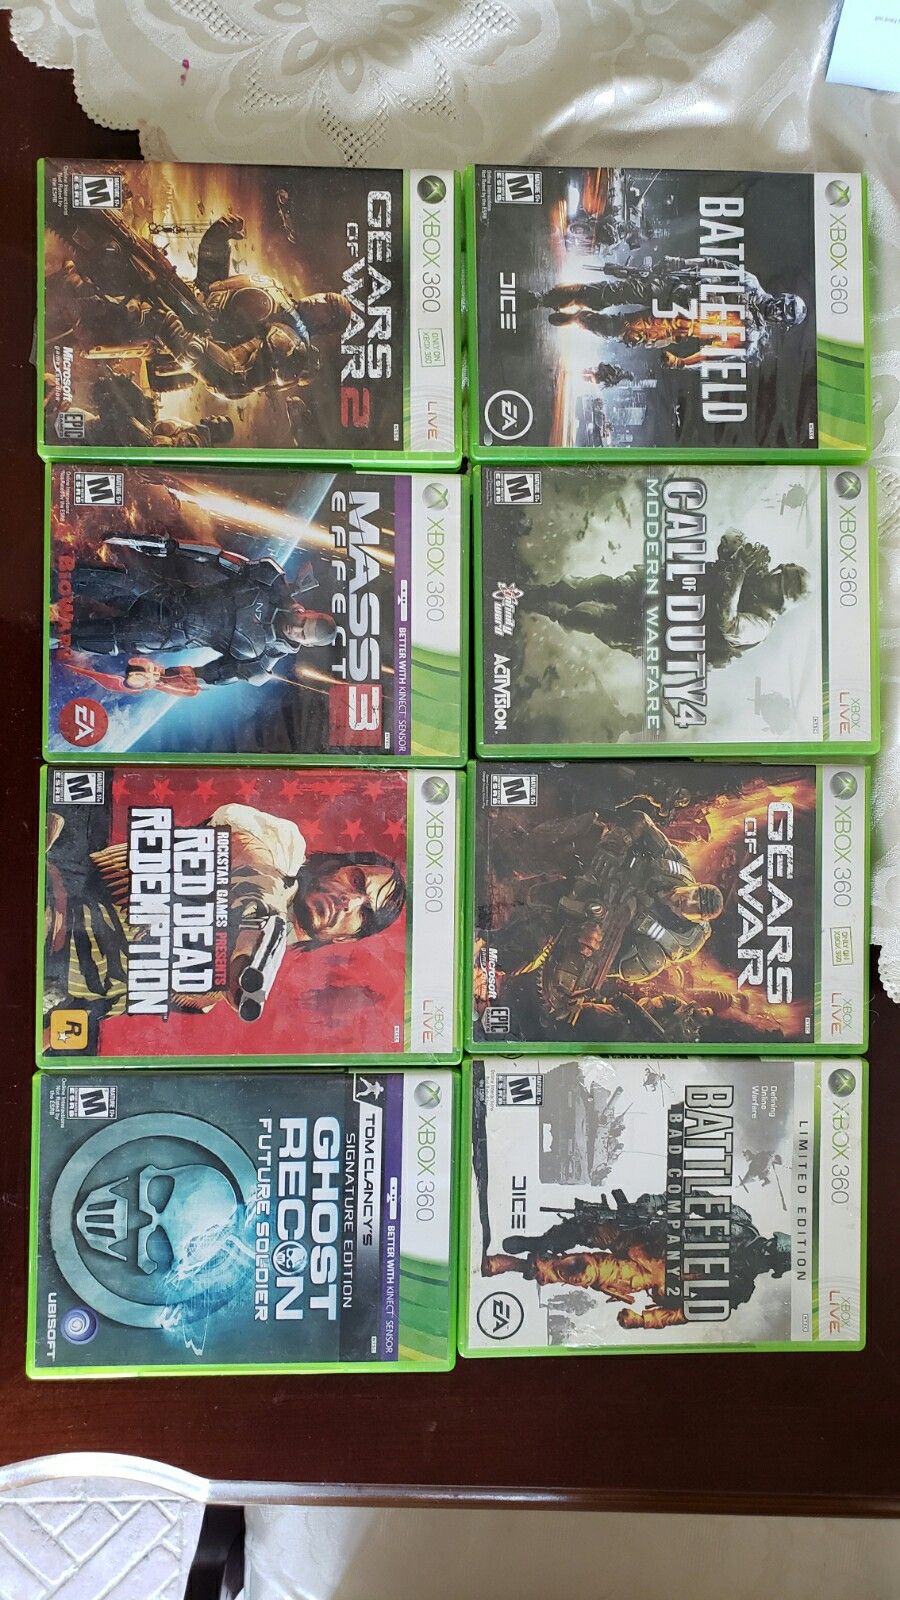 Xbox 360 games call of duty battlefield red dead redemption gears of war frontier